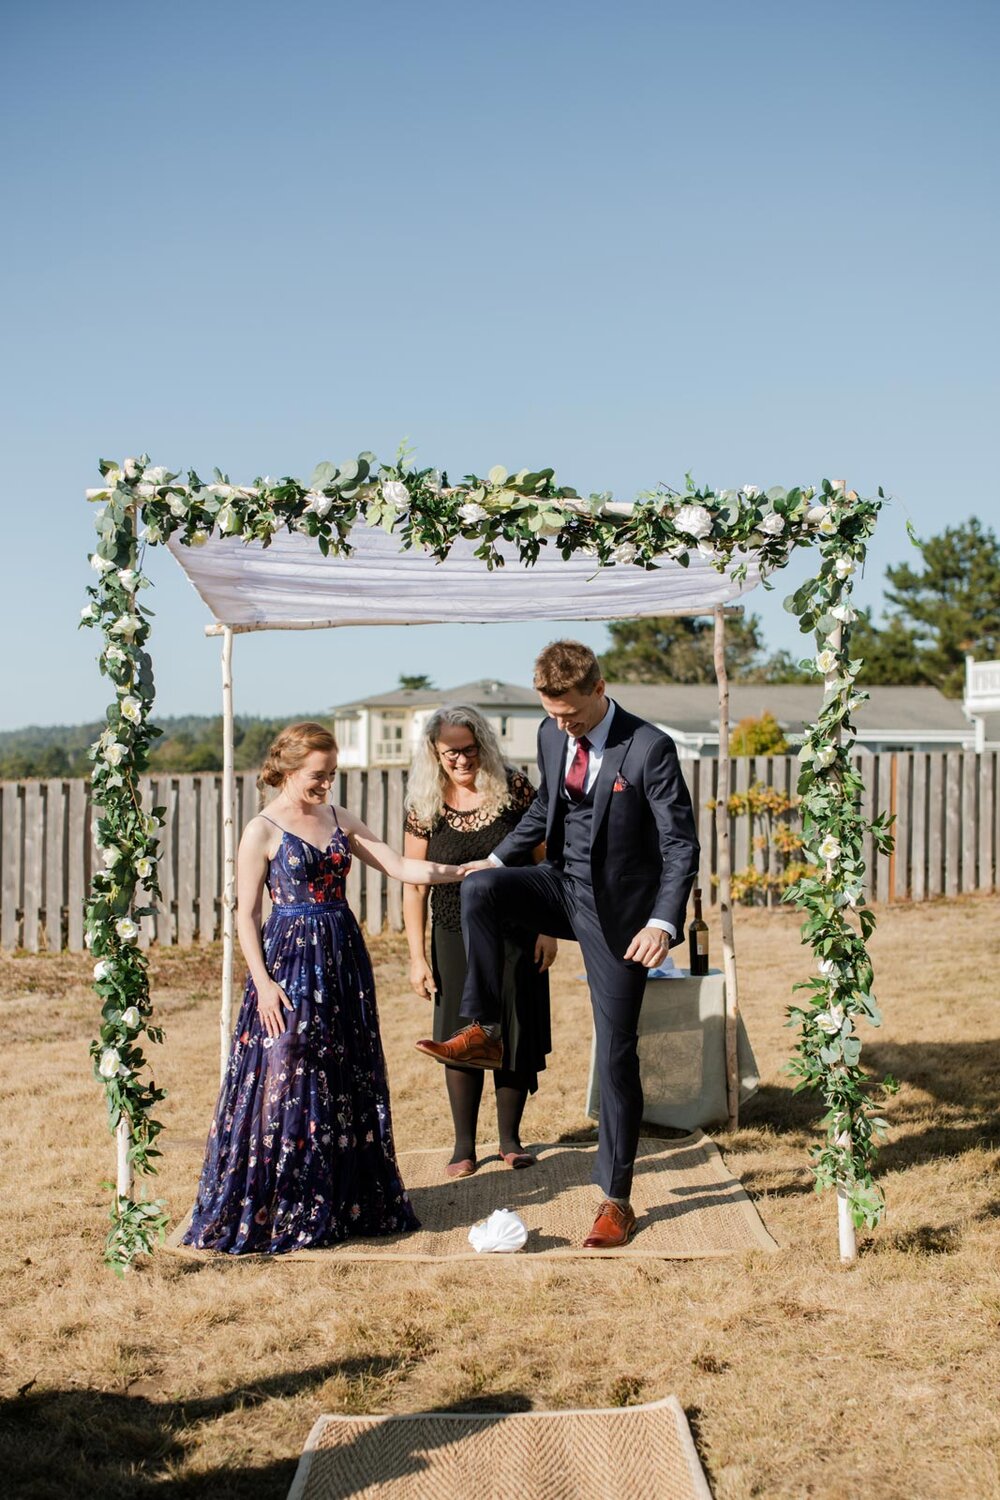 Groom breaking the glass under backyard chuppah with bride and officiant in Mendocino CA Carly Romeo + Co.